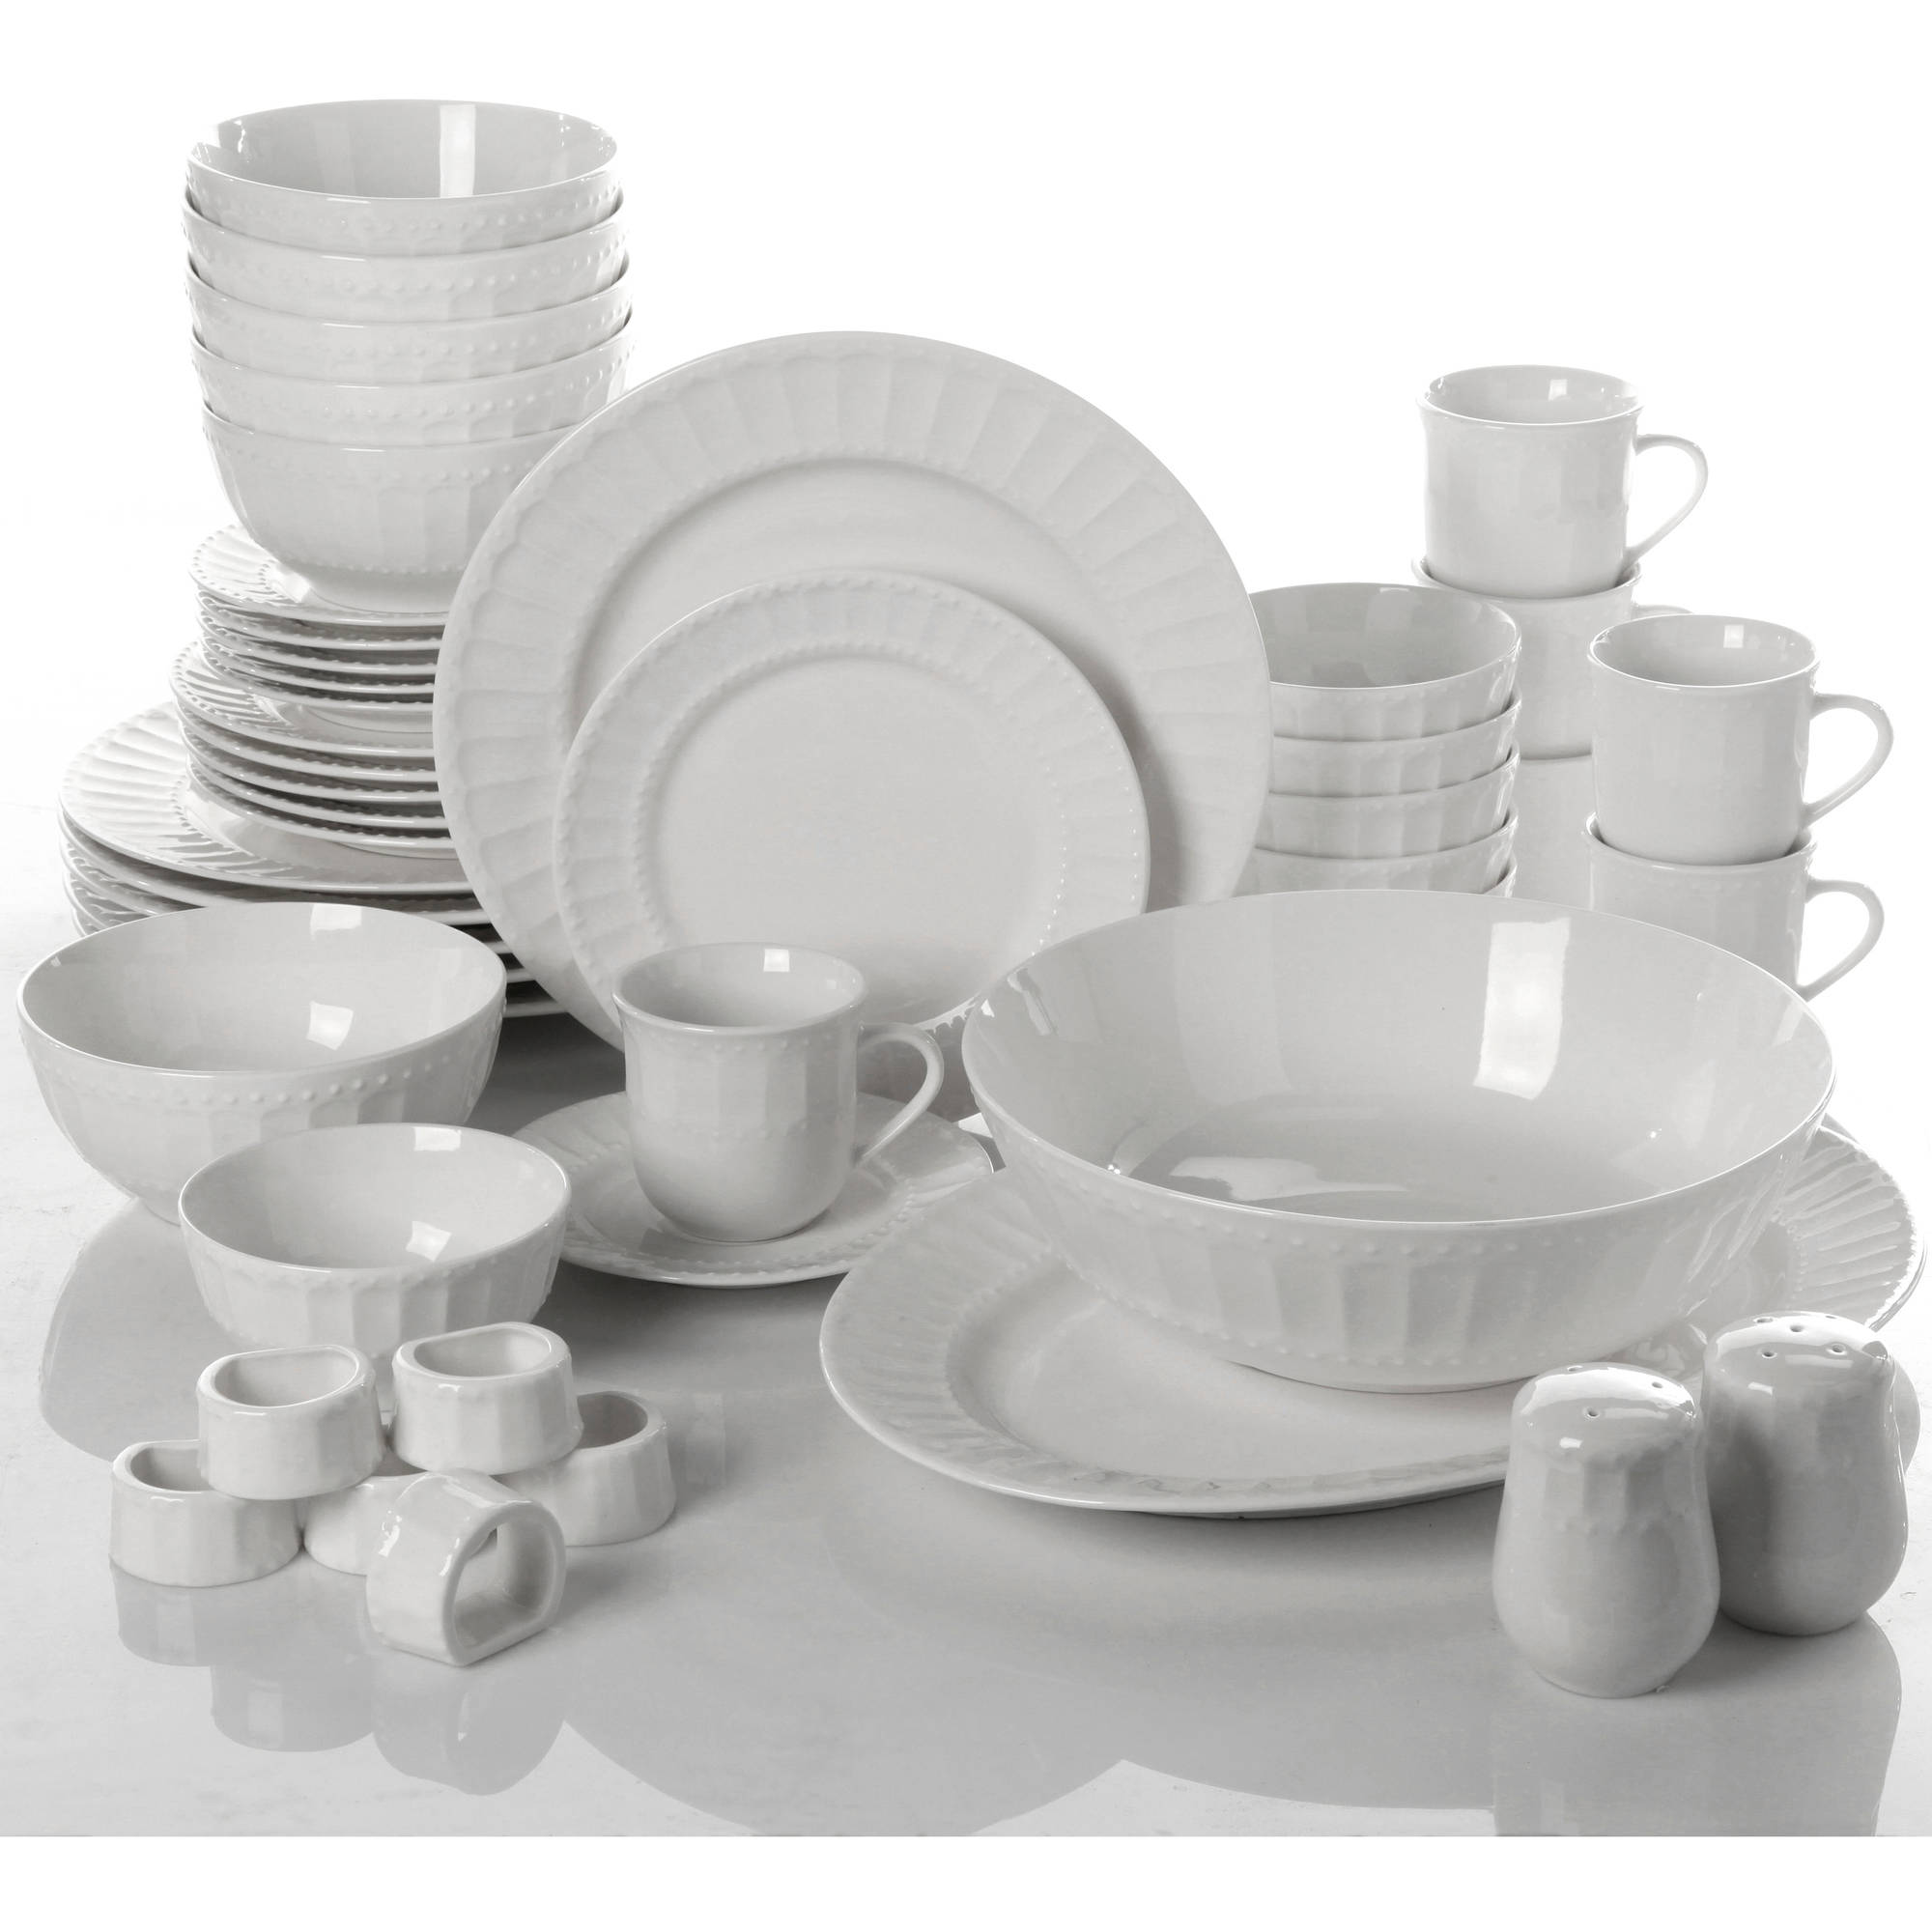 Gibson Home Regalia 46-Piece Dinnerware and Serve ware Set, Service for 6 - image 2 of 12